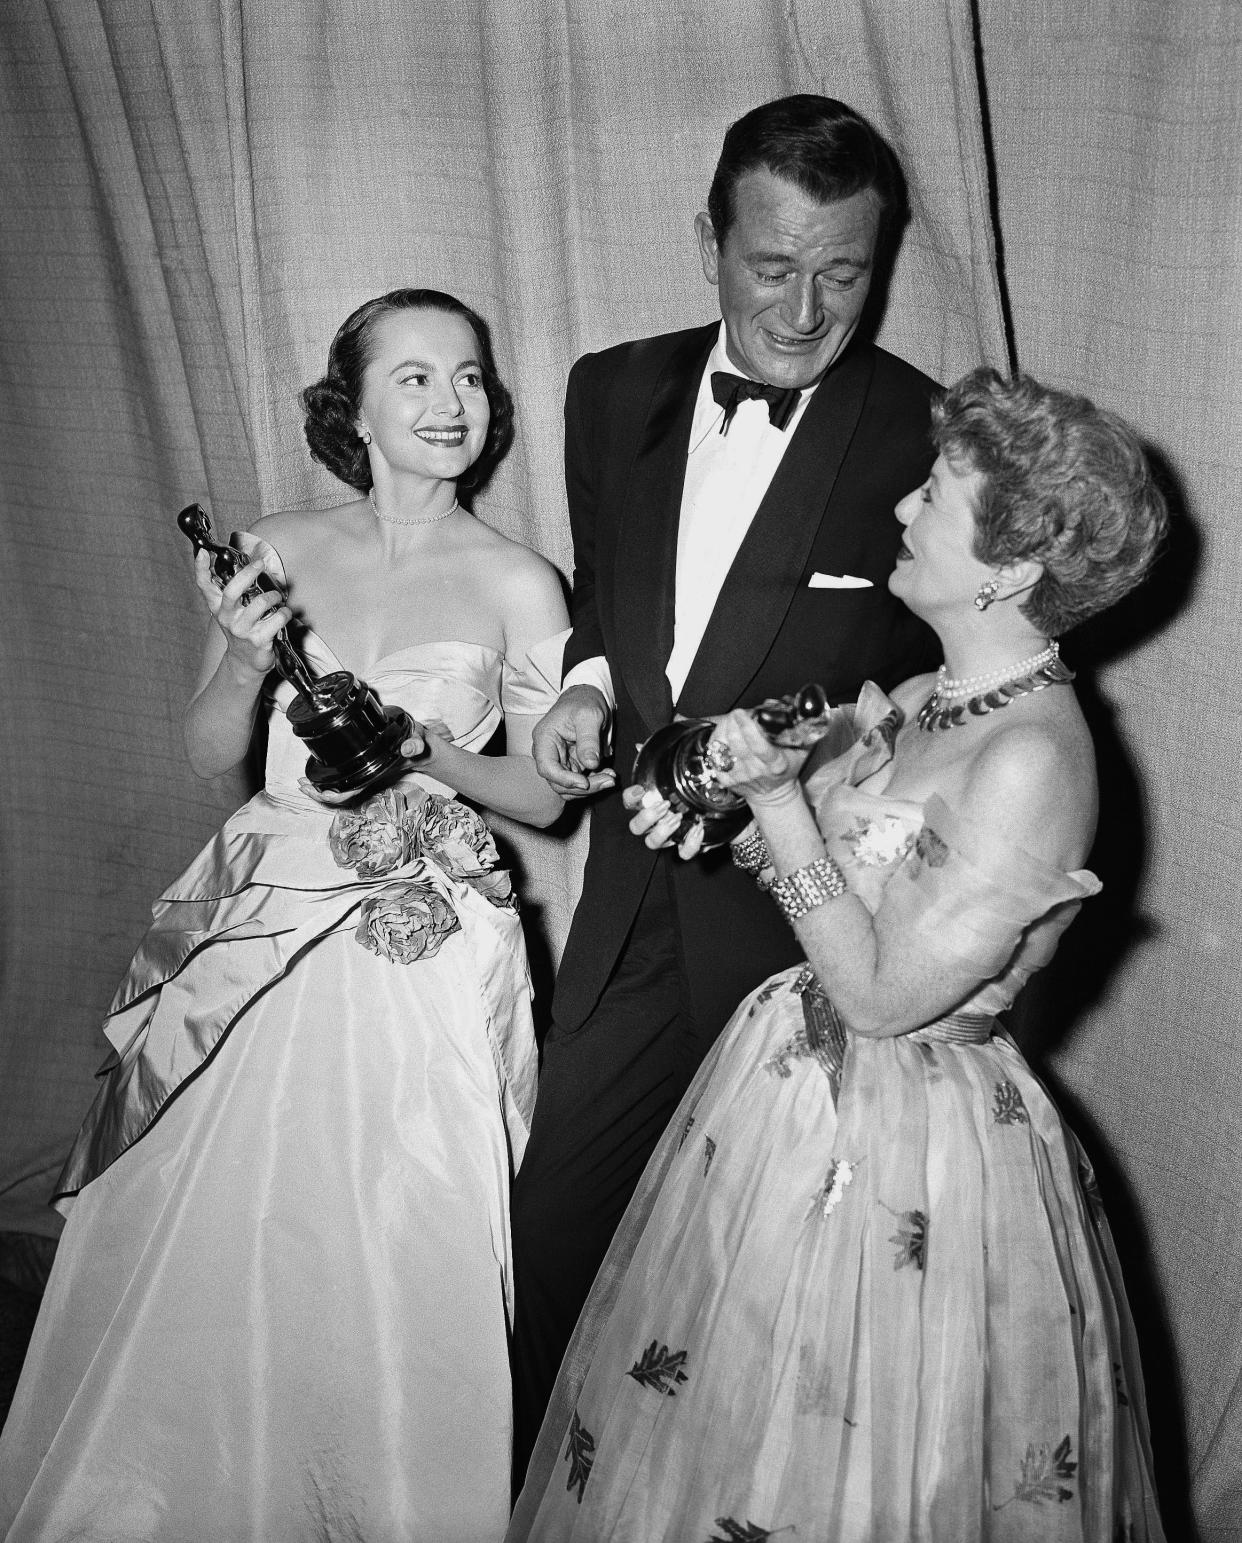 John Wayne shows the gold statuettes he accepted for Gary Cooper and John Ford to two former Academy Award winners, Olivia De Havilland and Janet Gaynor, after the ceremony in Hollywood on March 19, 1953.